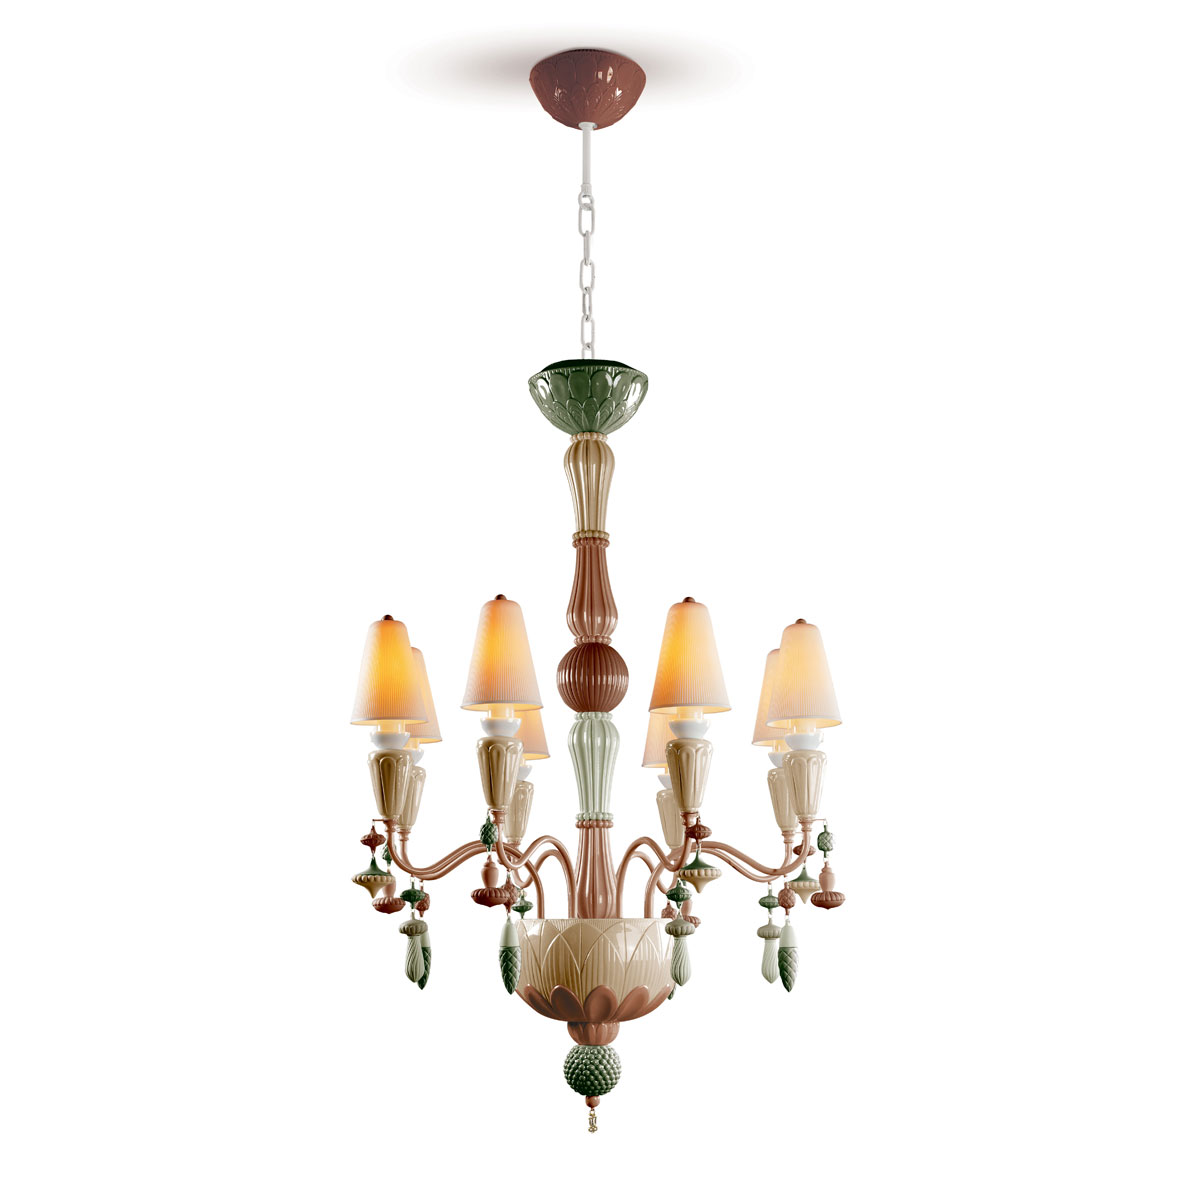 Lladro Classic Lighting, Ivy And Seed 8 Lights Chandelier. Spices